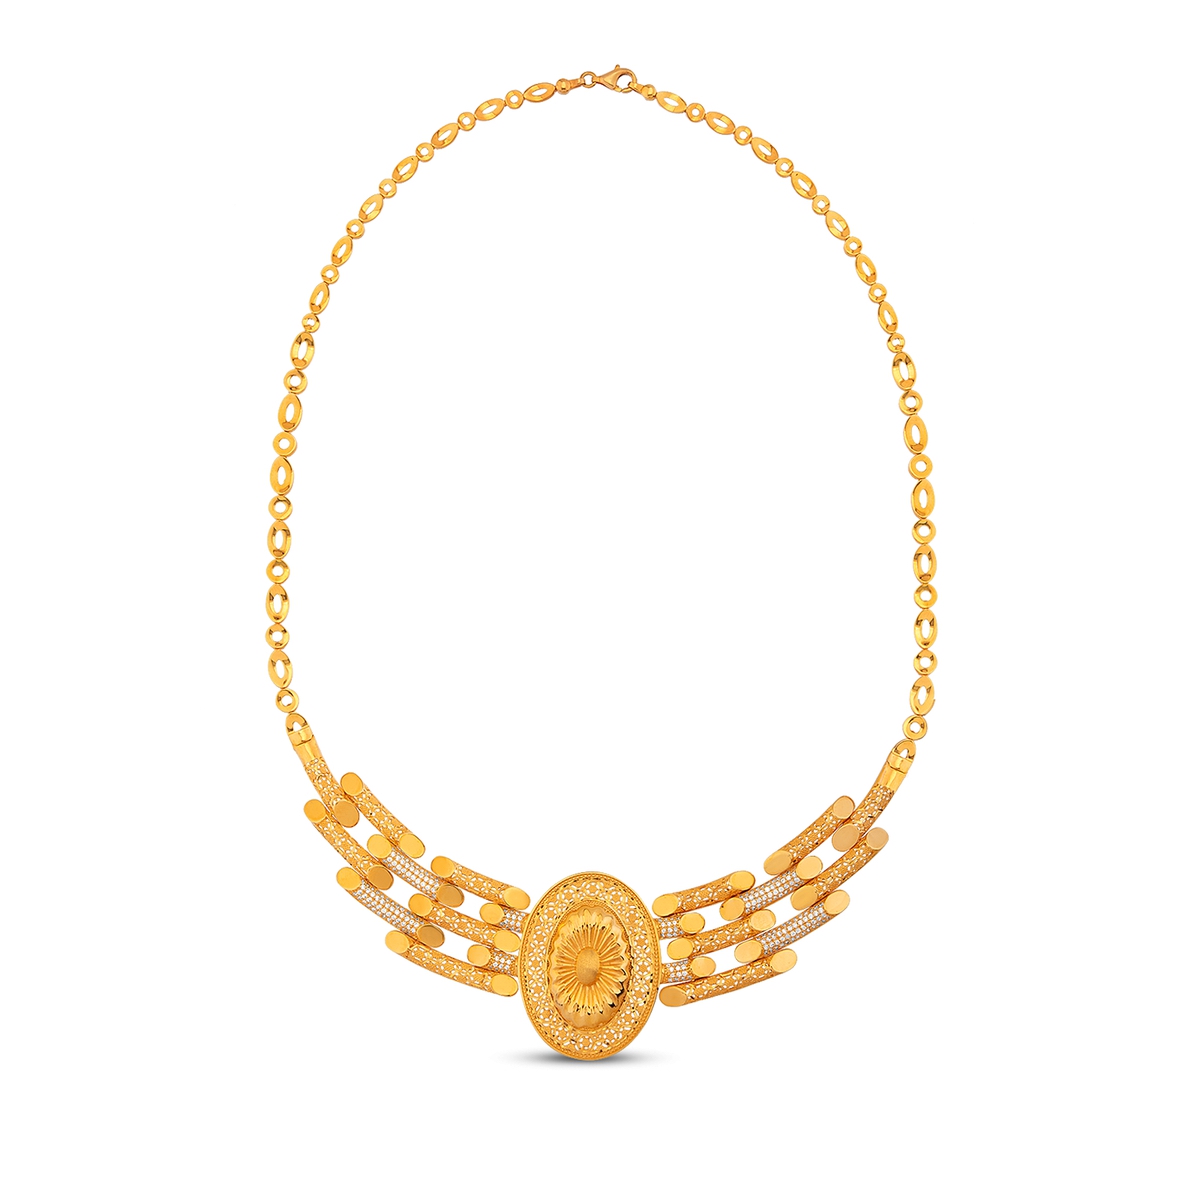 21K 0.410 ct Gold Necklace